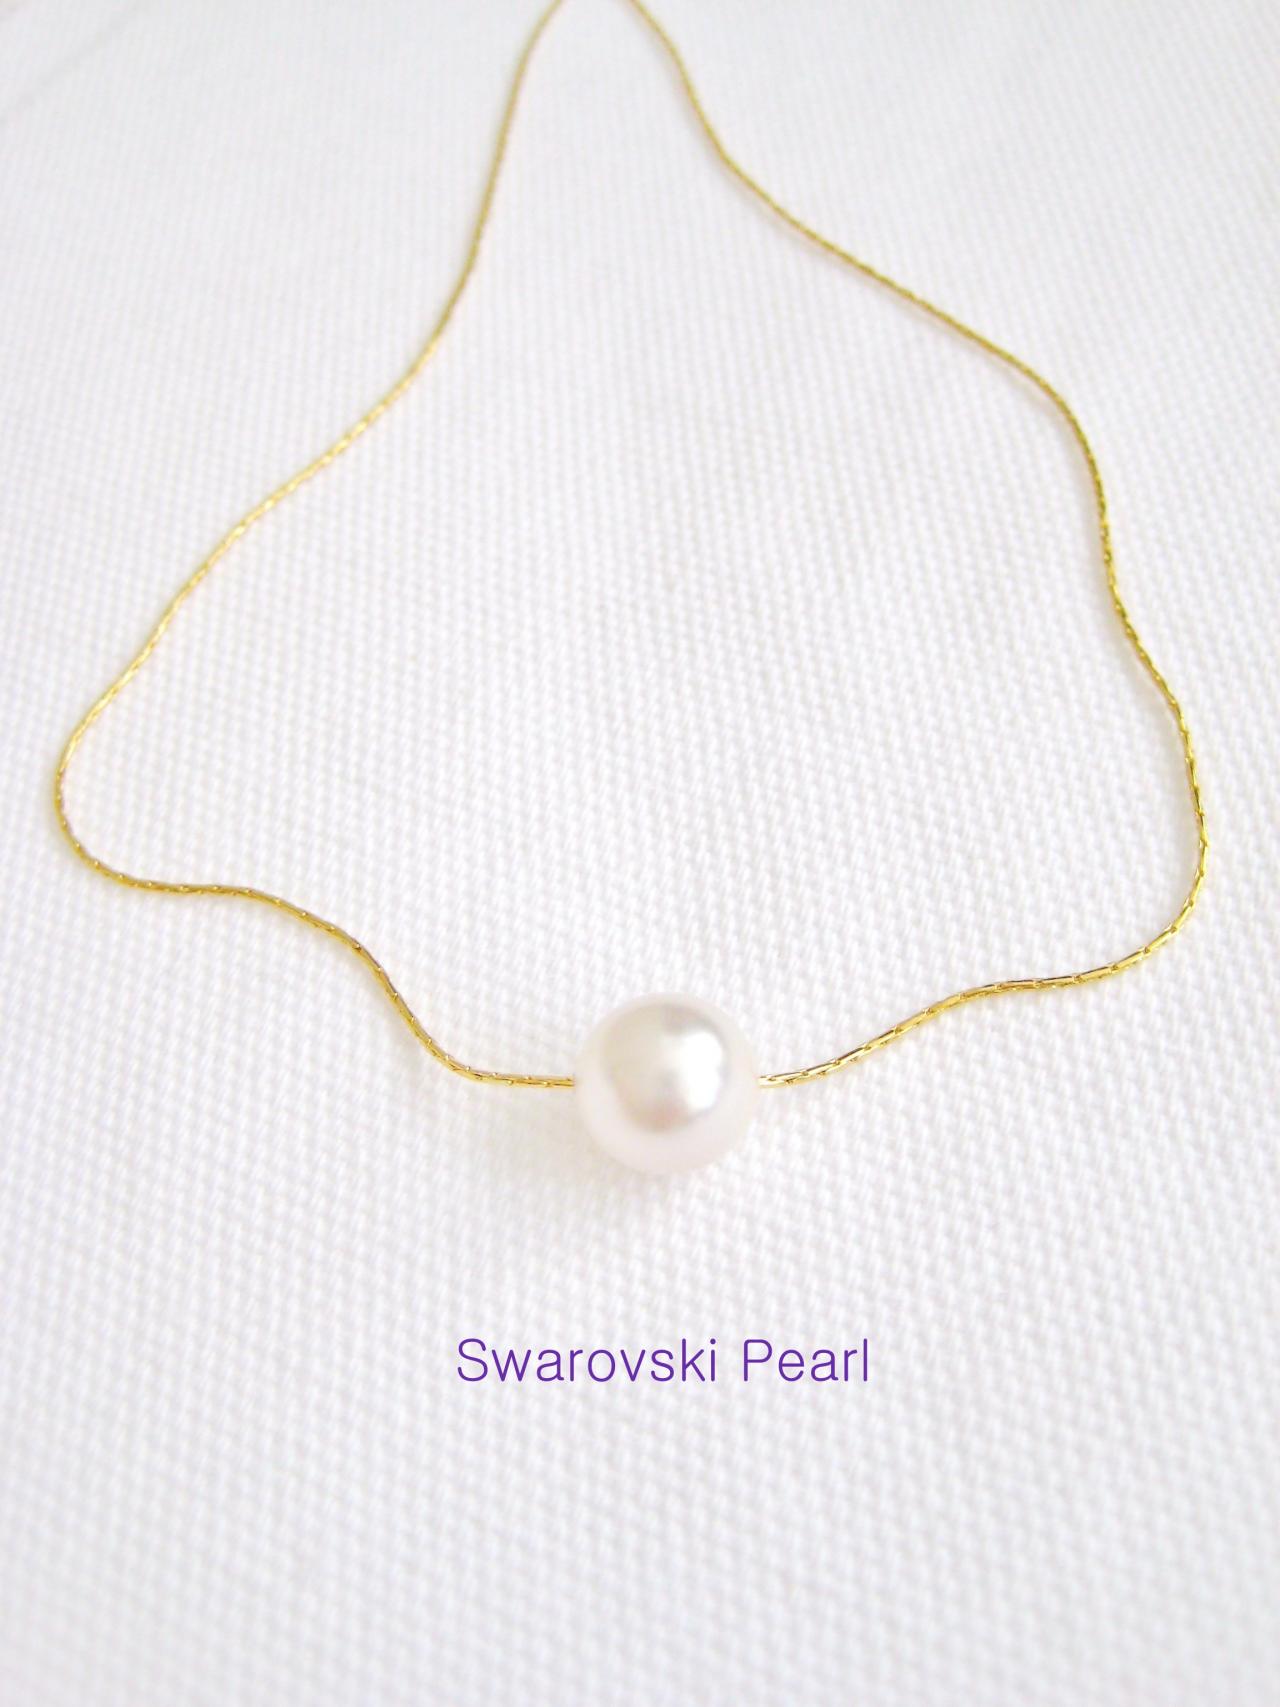 Bridal Single Pearl Necklace Wedding Jewelry Swarovski 8mm Or 10mm Round Pearl Bridesmaid Gift Minimalist Necklace Gold Necklace (n027)